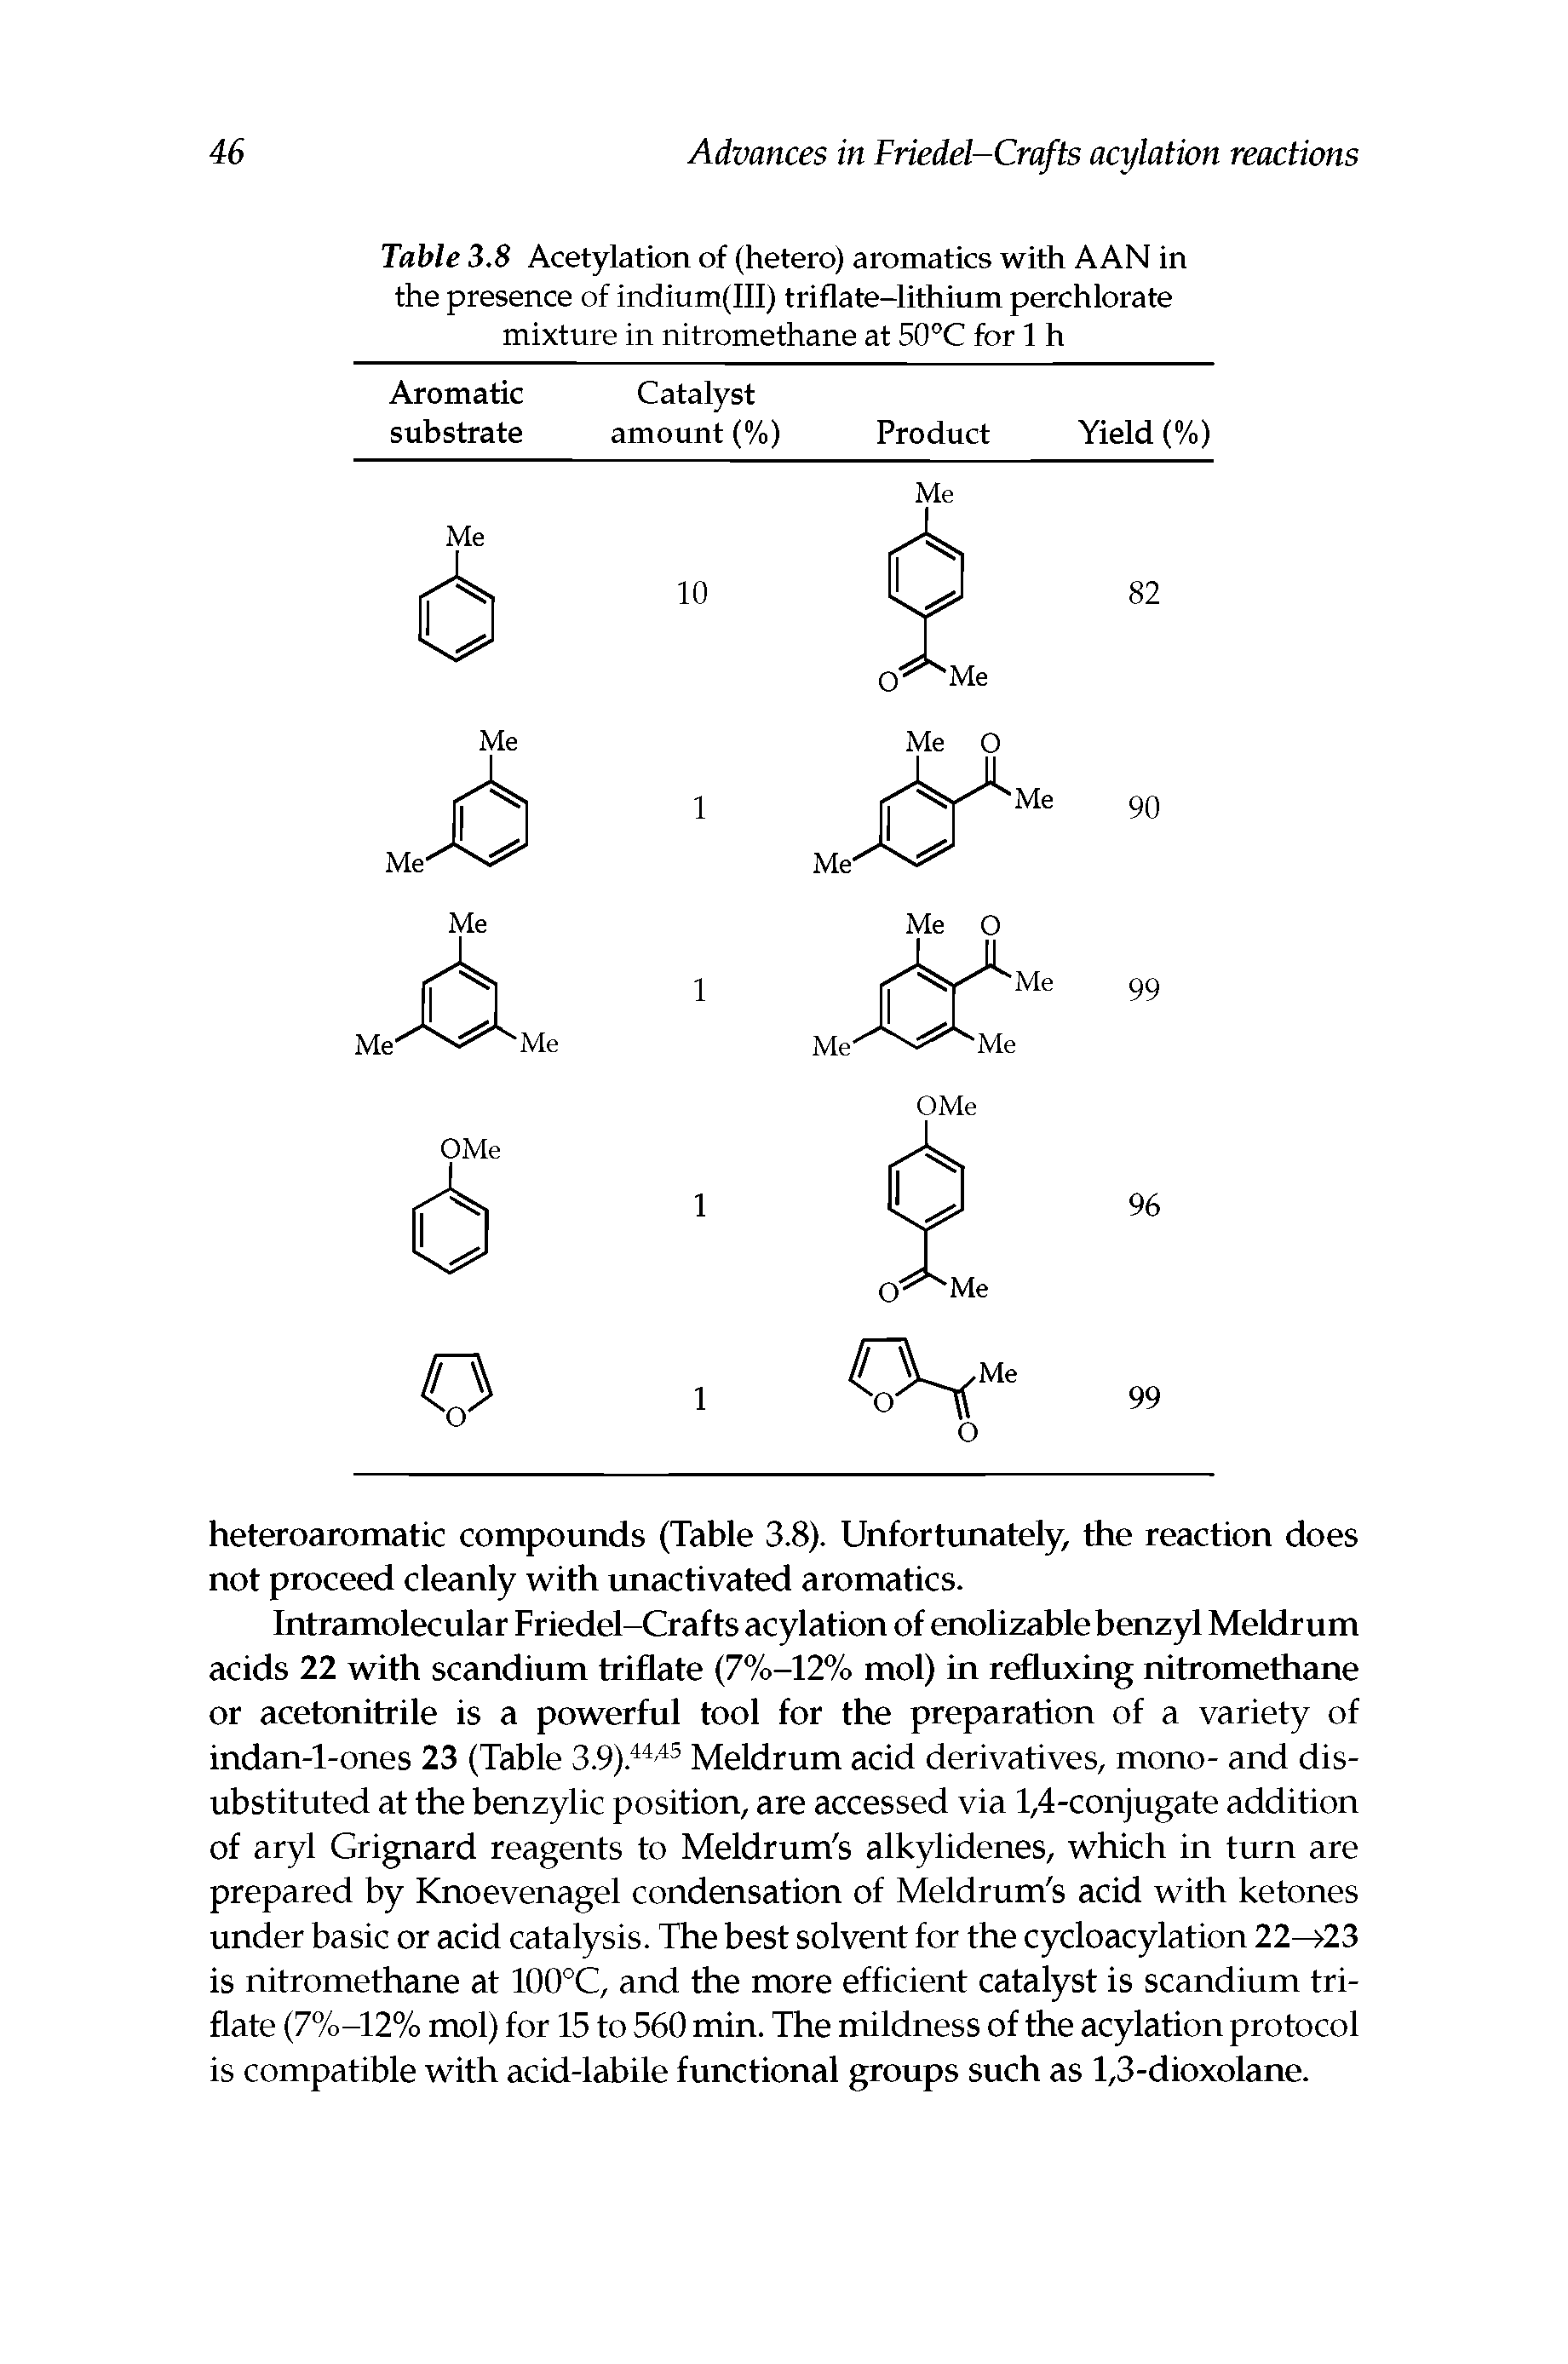 Table 3.8 Acetylation of (hetero) aromatics with AAN in the presence of indium(lll) triflate-lithium perchlorate mixture in nitromethane at 50°C for 1 h...